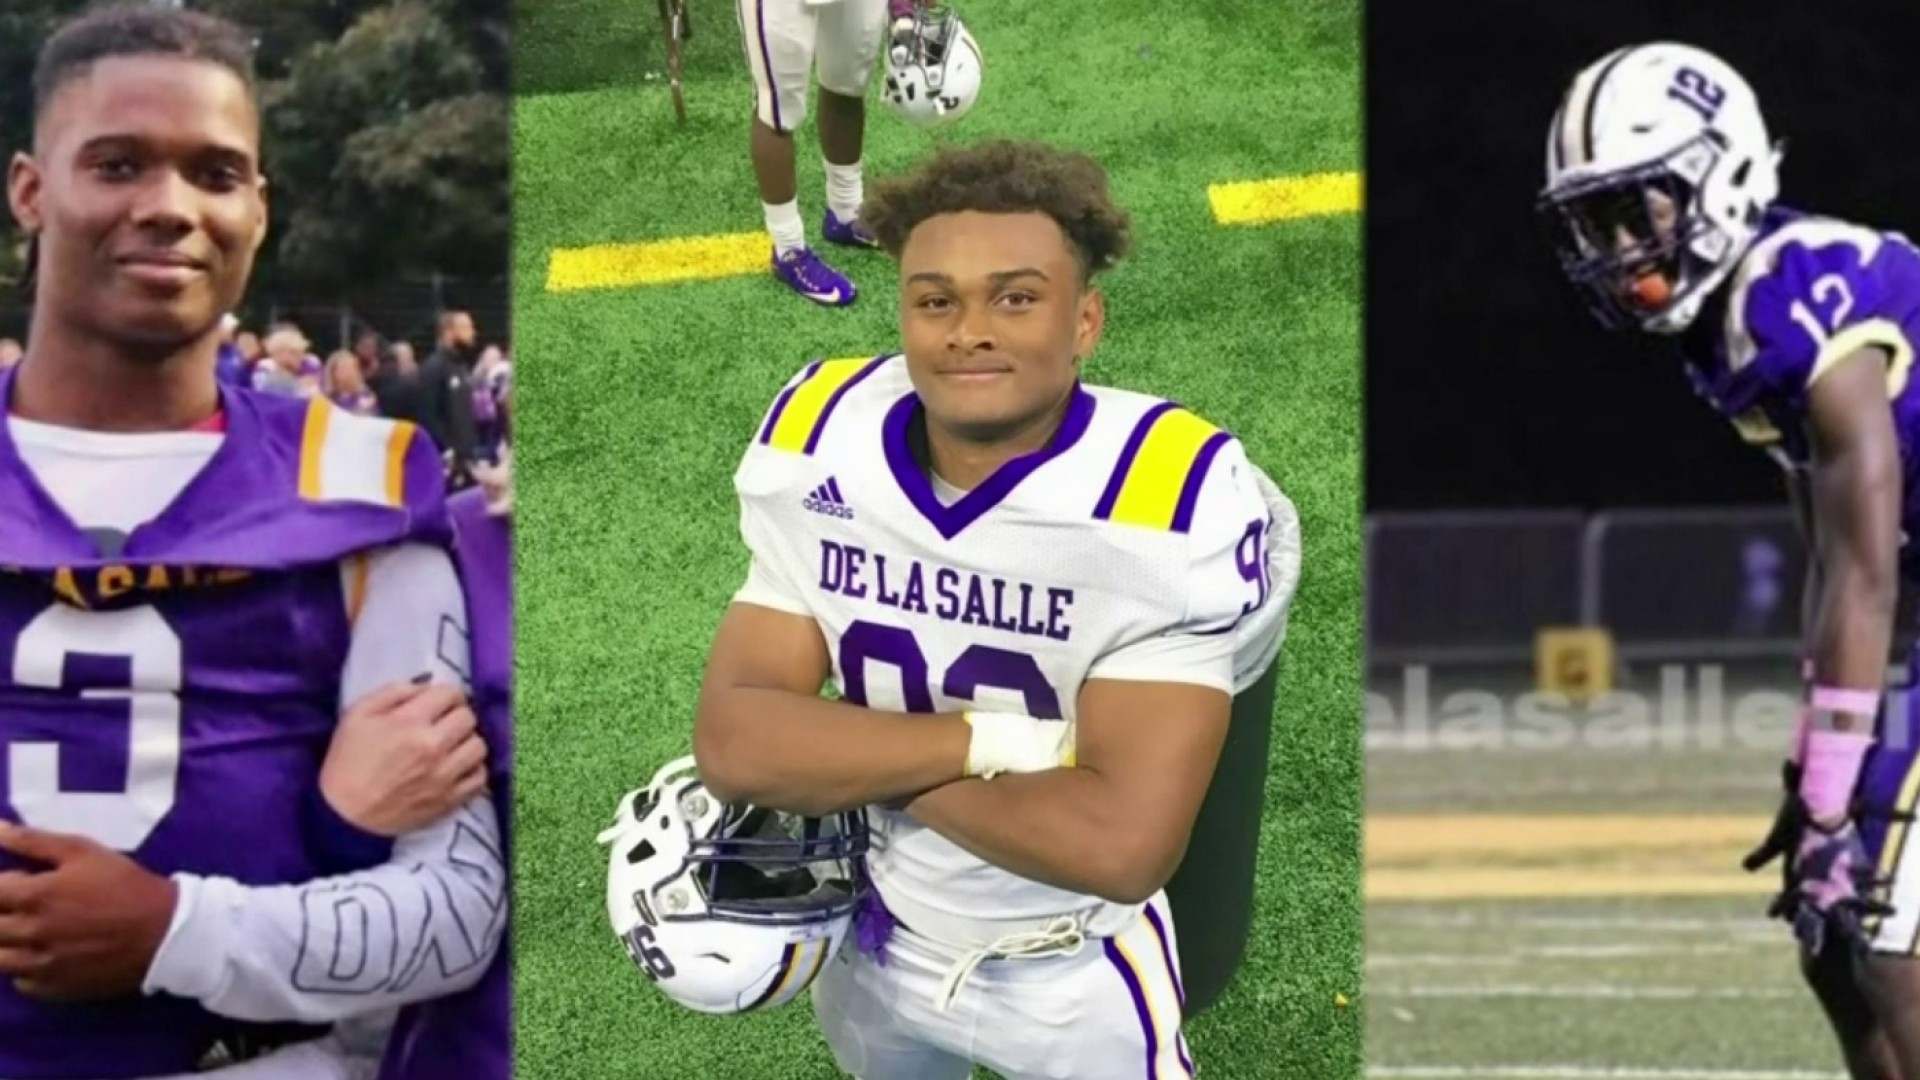 Hear from the parents of three Warren De La Salle football players charged  in hazing case